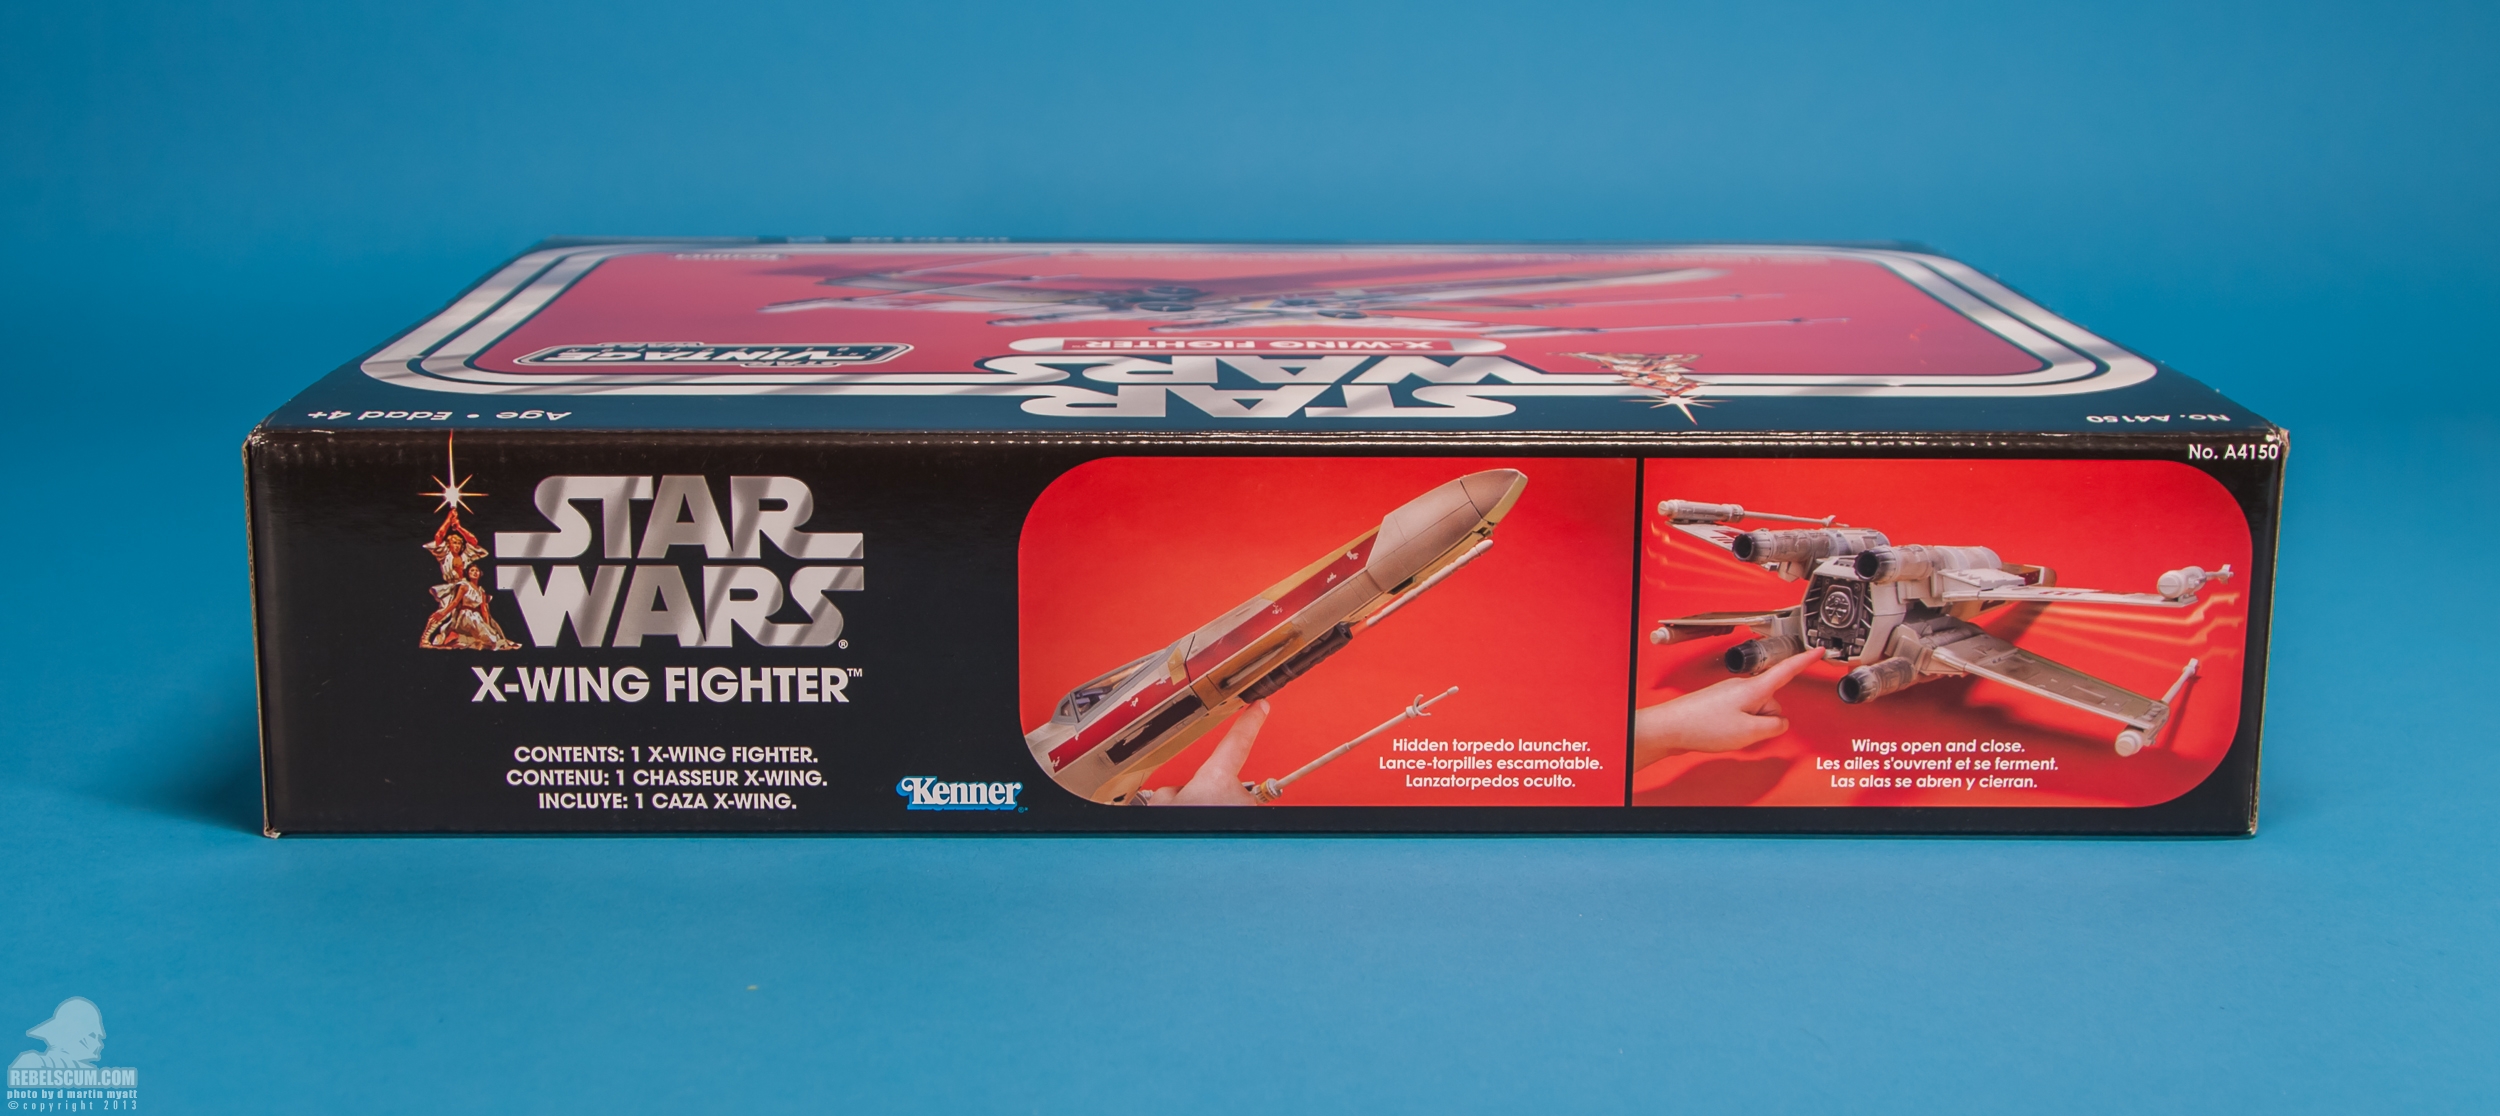 Biggs-Red-3-X-Wing-Fighter-The-Vintage-Collection-TVC-Hasbro-049.jpg